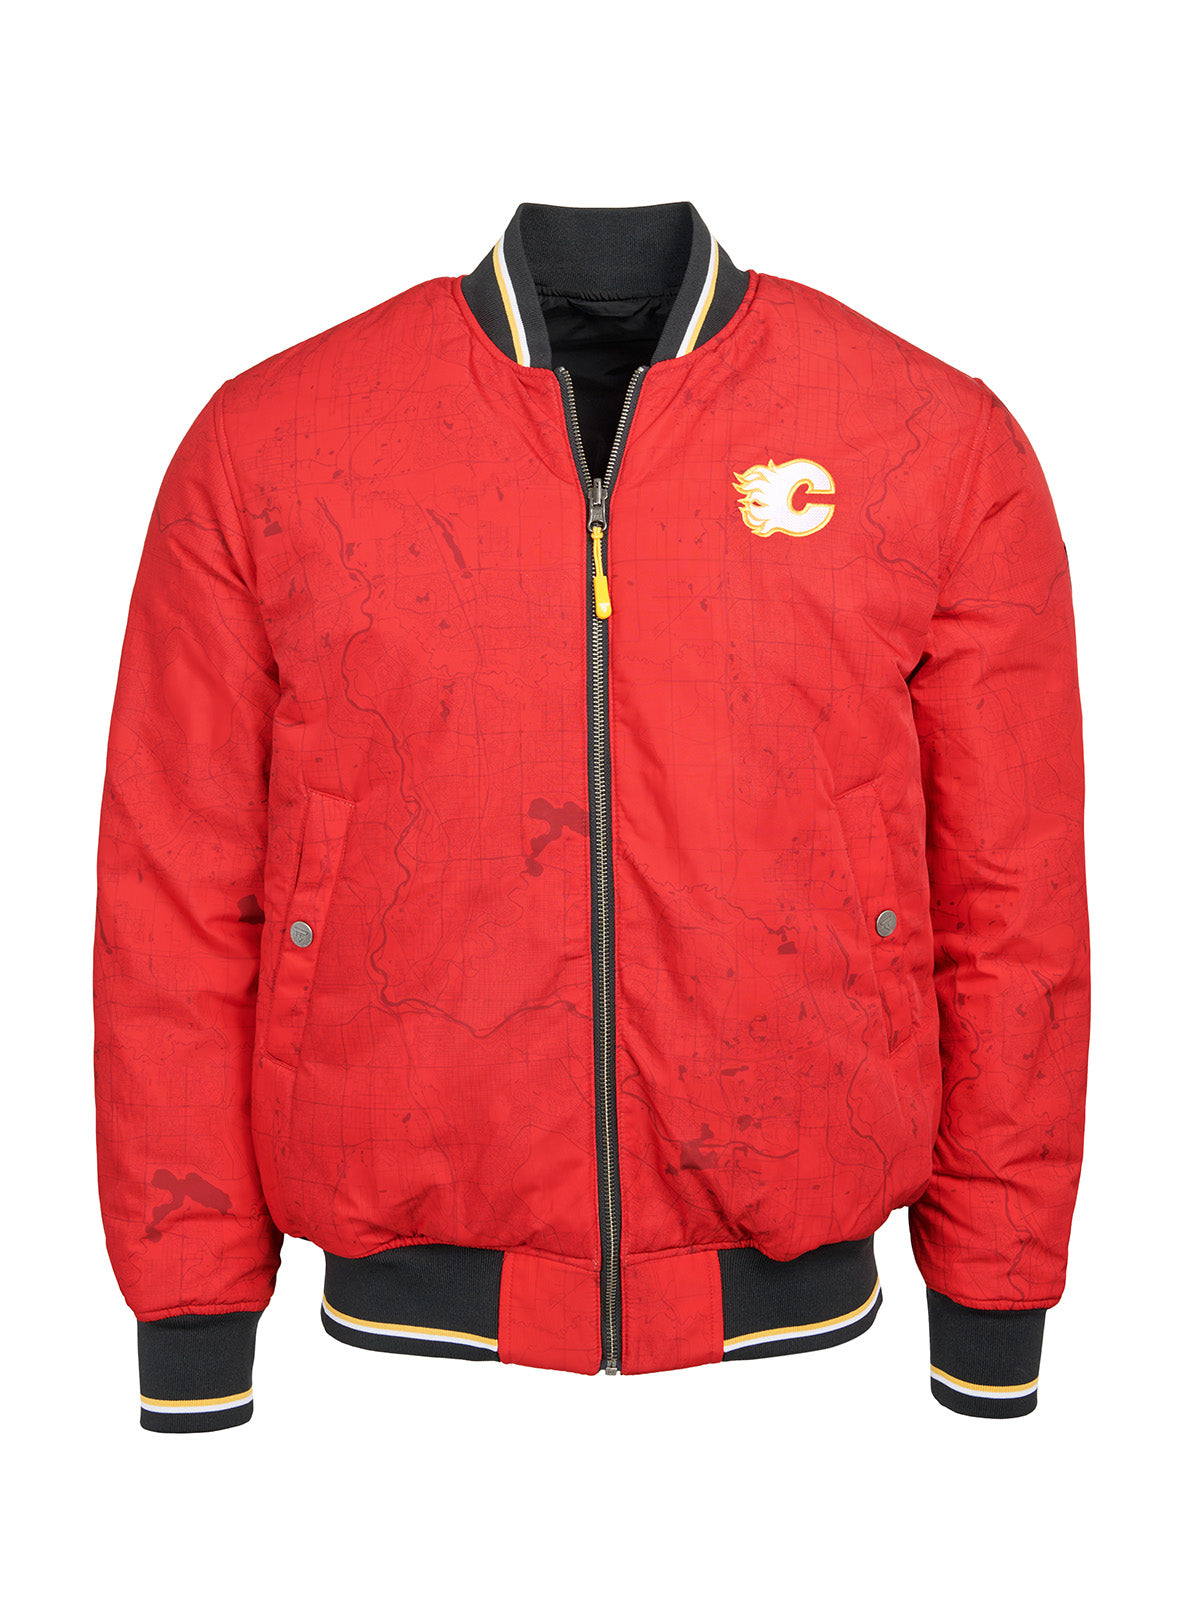 Calgary Flames Bomber - Reversible bomber jacket featuring the iconic Calgary Flames logo with ribbed cuffs, collar and hem in the team colors